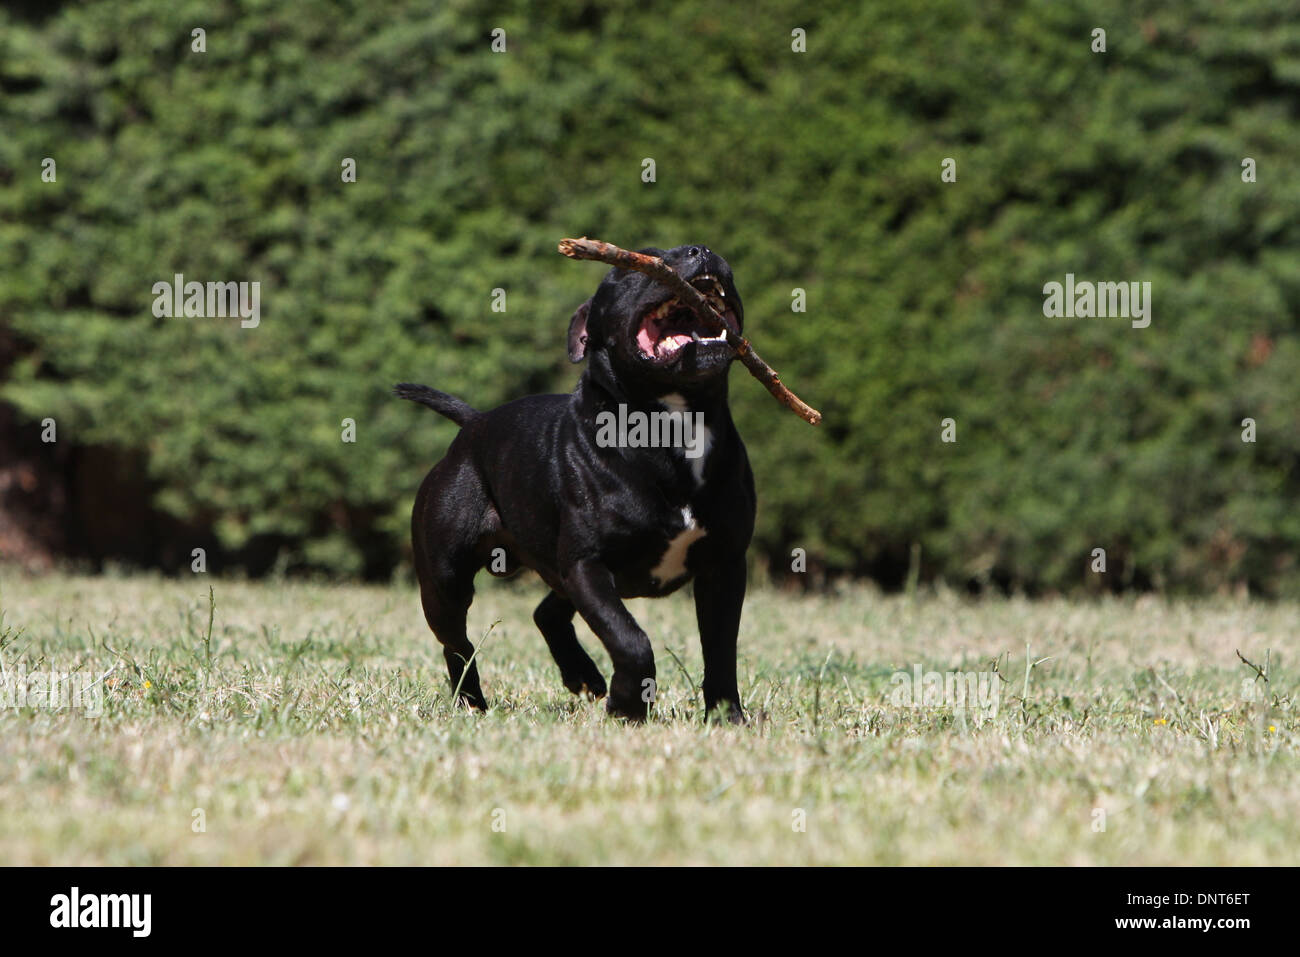 dog Staffordshire Bull Terrier / Staffie  /   adult (black) running with a stick in its mouth in a garden Stock Photo